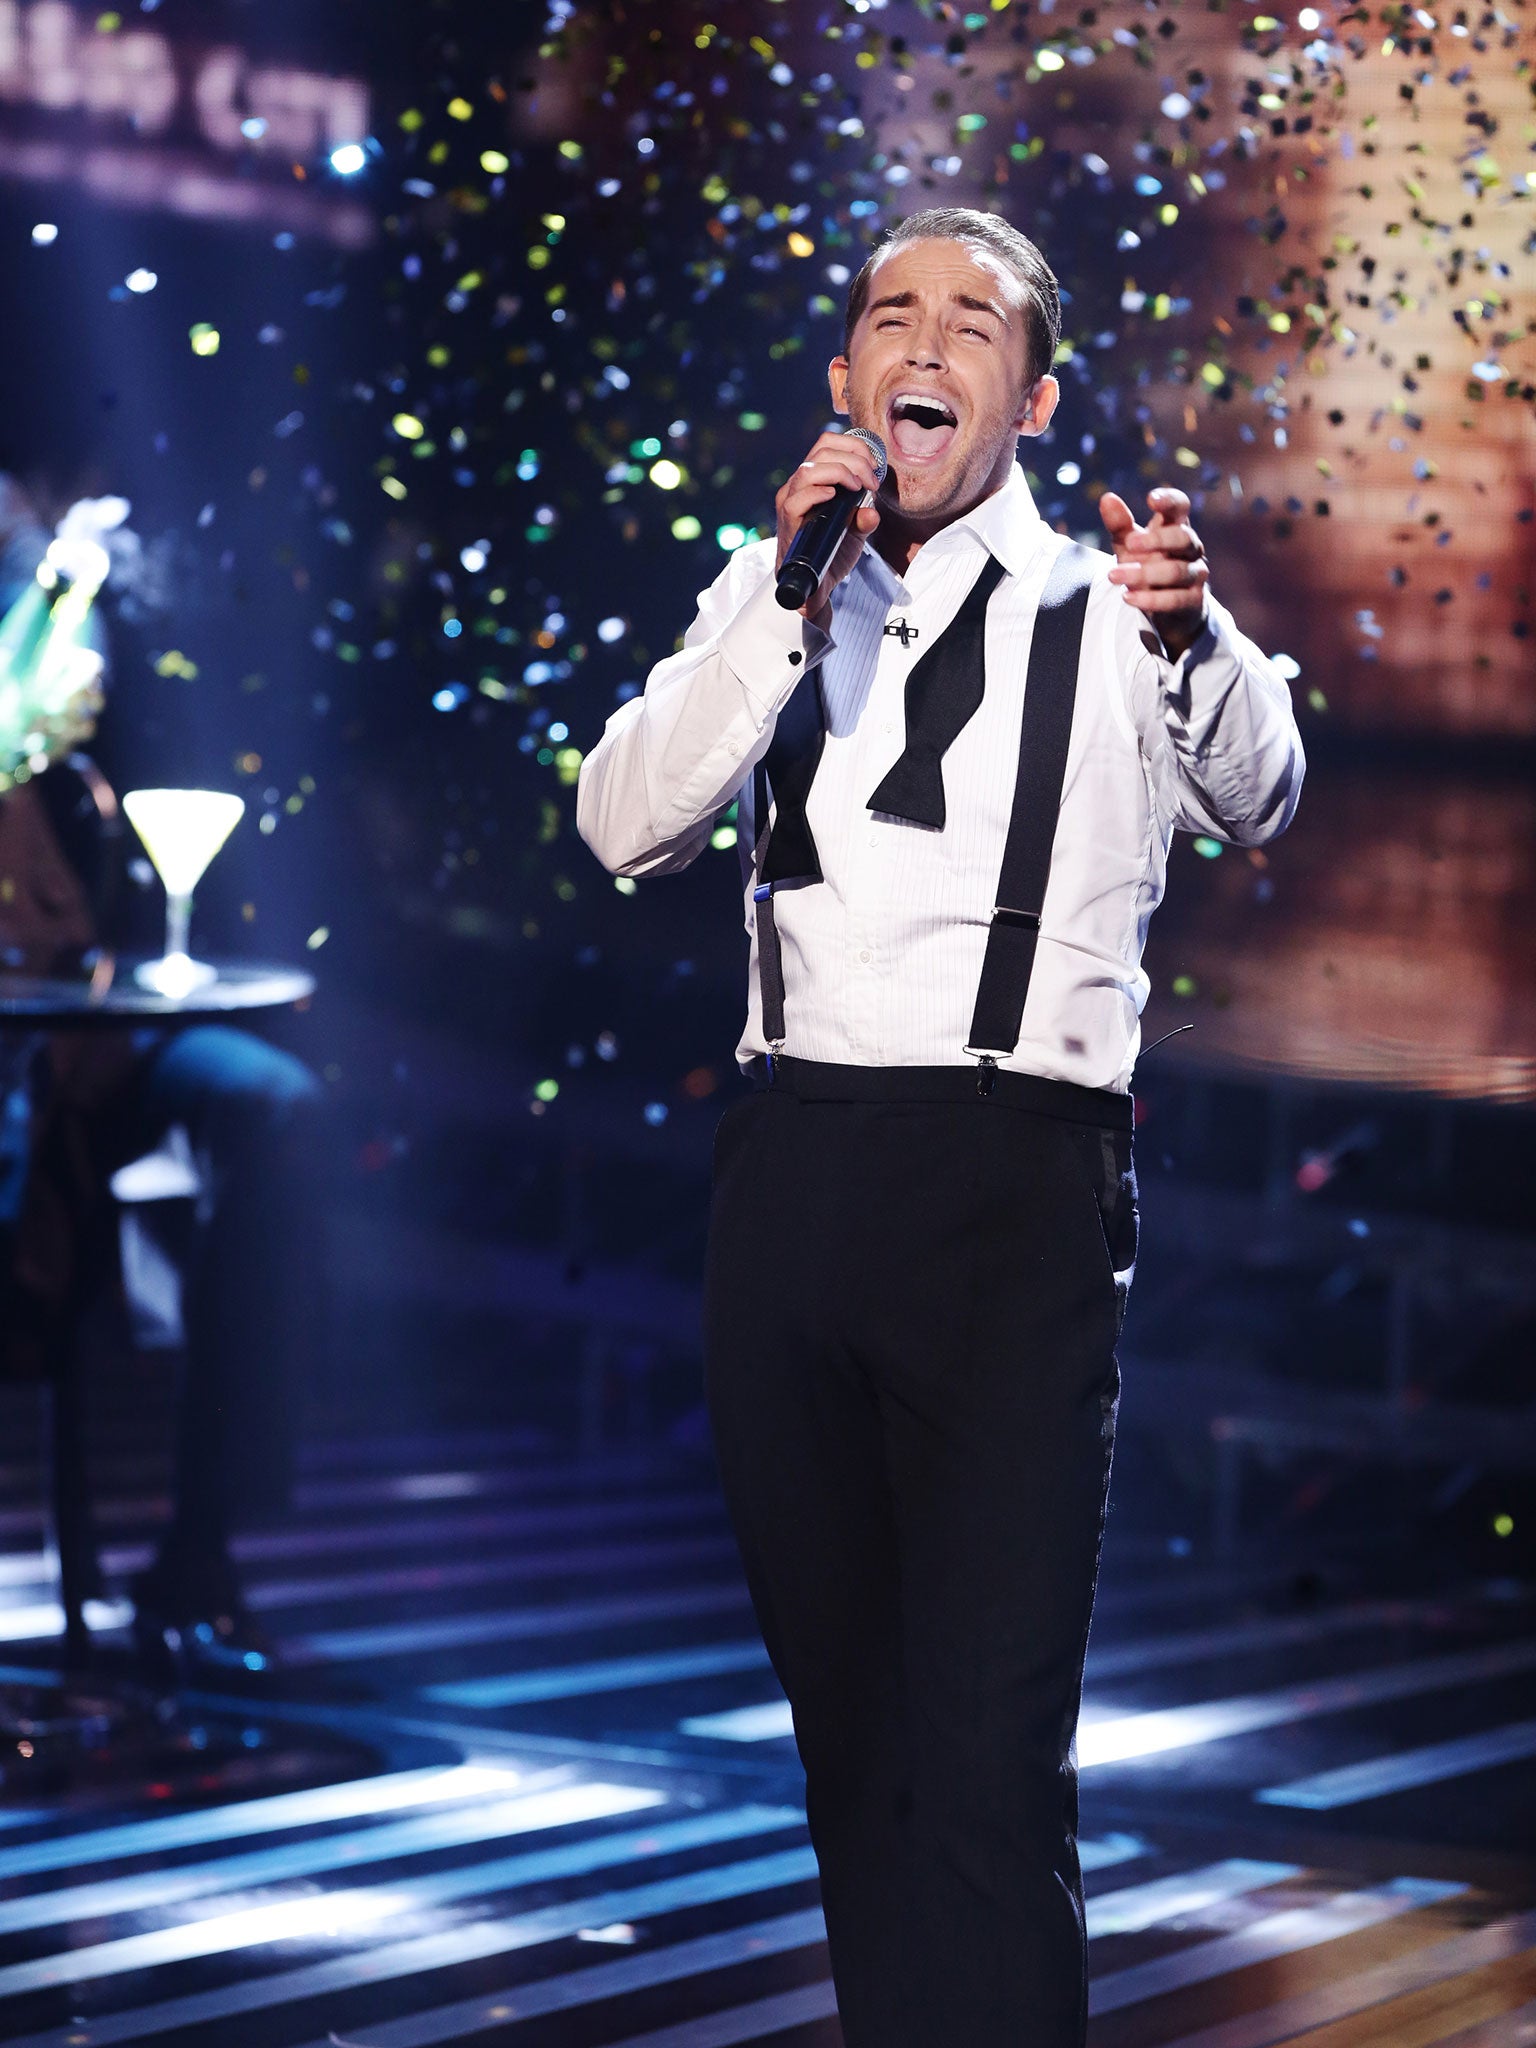 Jay James has left The X Factor following a sing-off with Stevi Ritchie